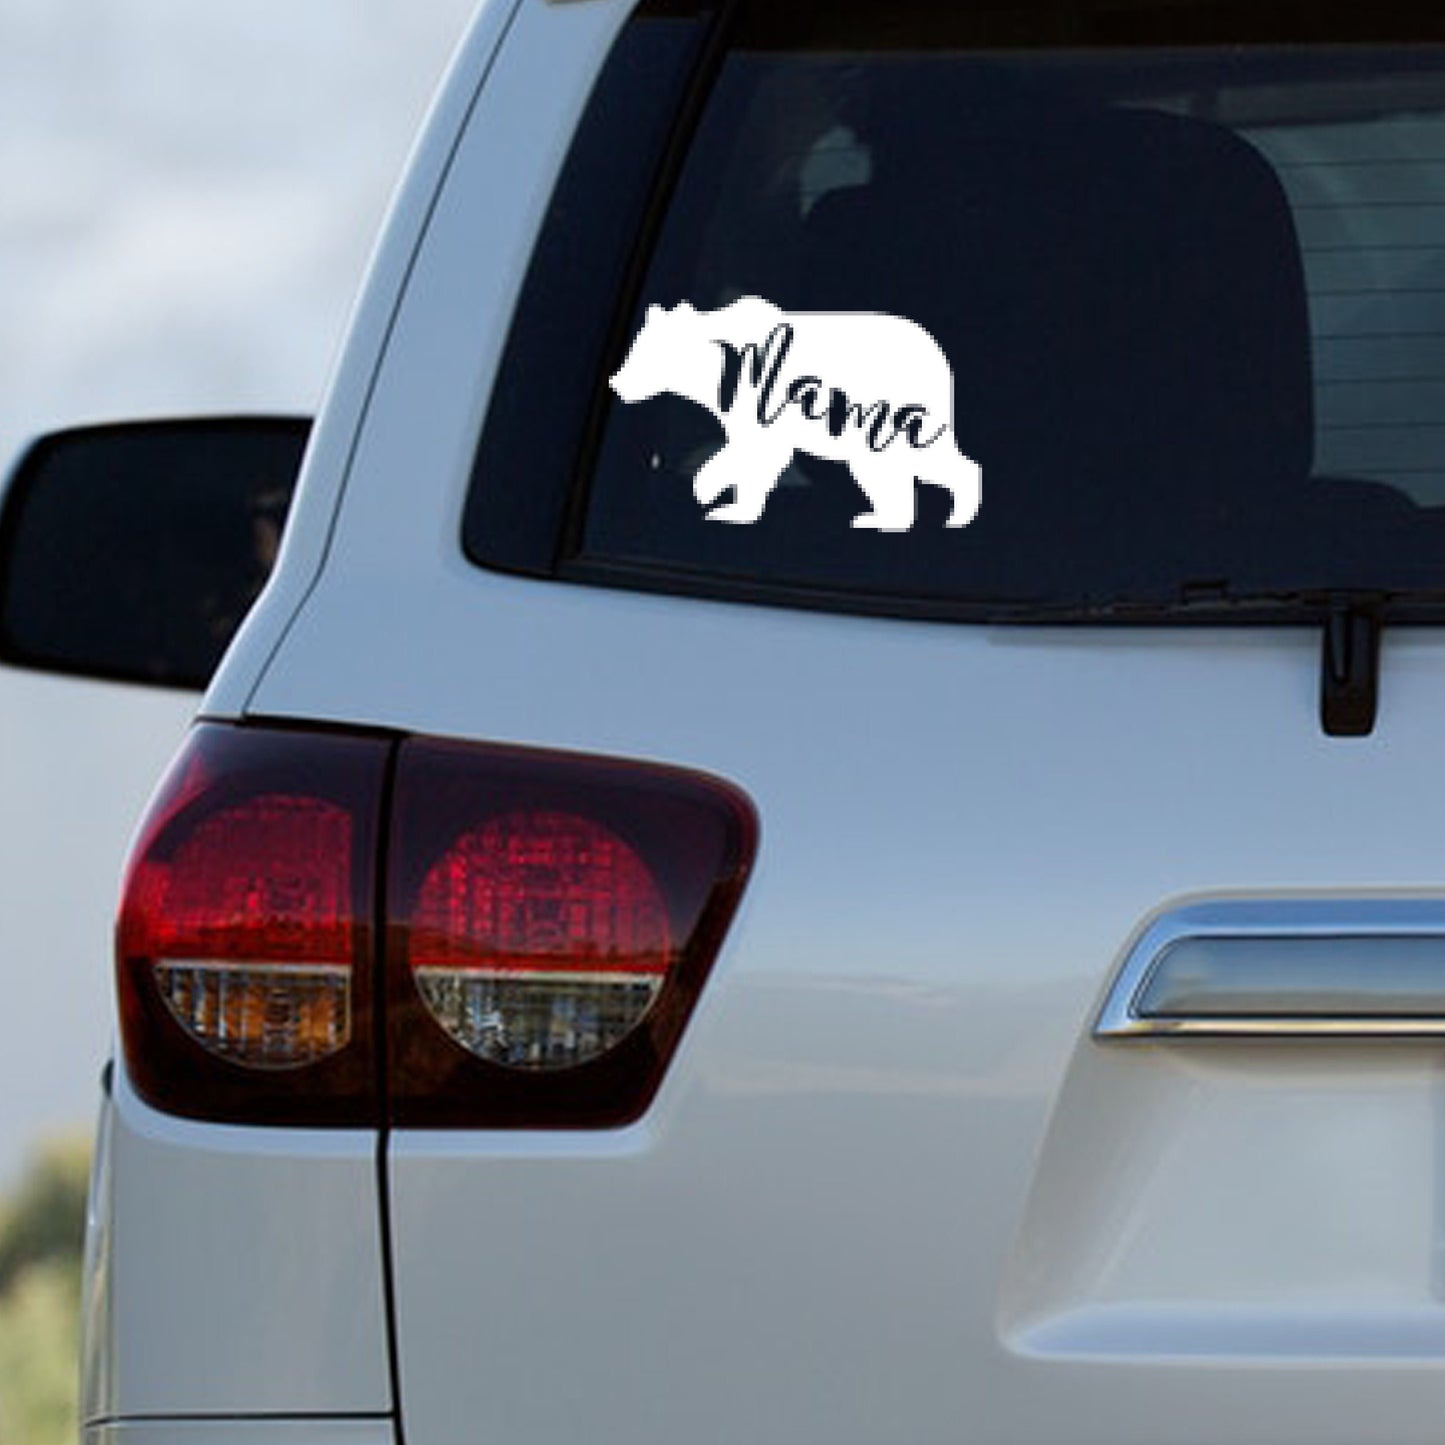 Mama Bear Permanent Vinyl Decal - Car Decal, Wall Decal, Laptop Decal, Cricut/Silhouette Decal, Cup Decal, Tumbler Decal, Wine Glass Decal